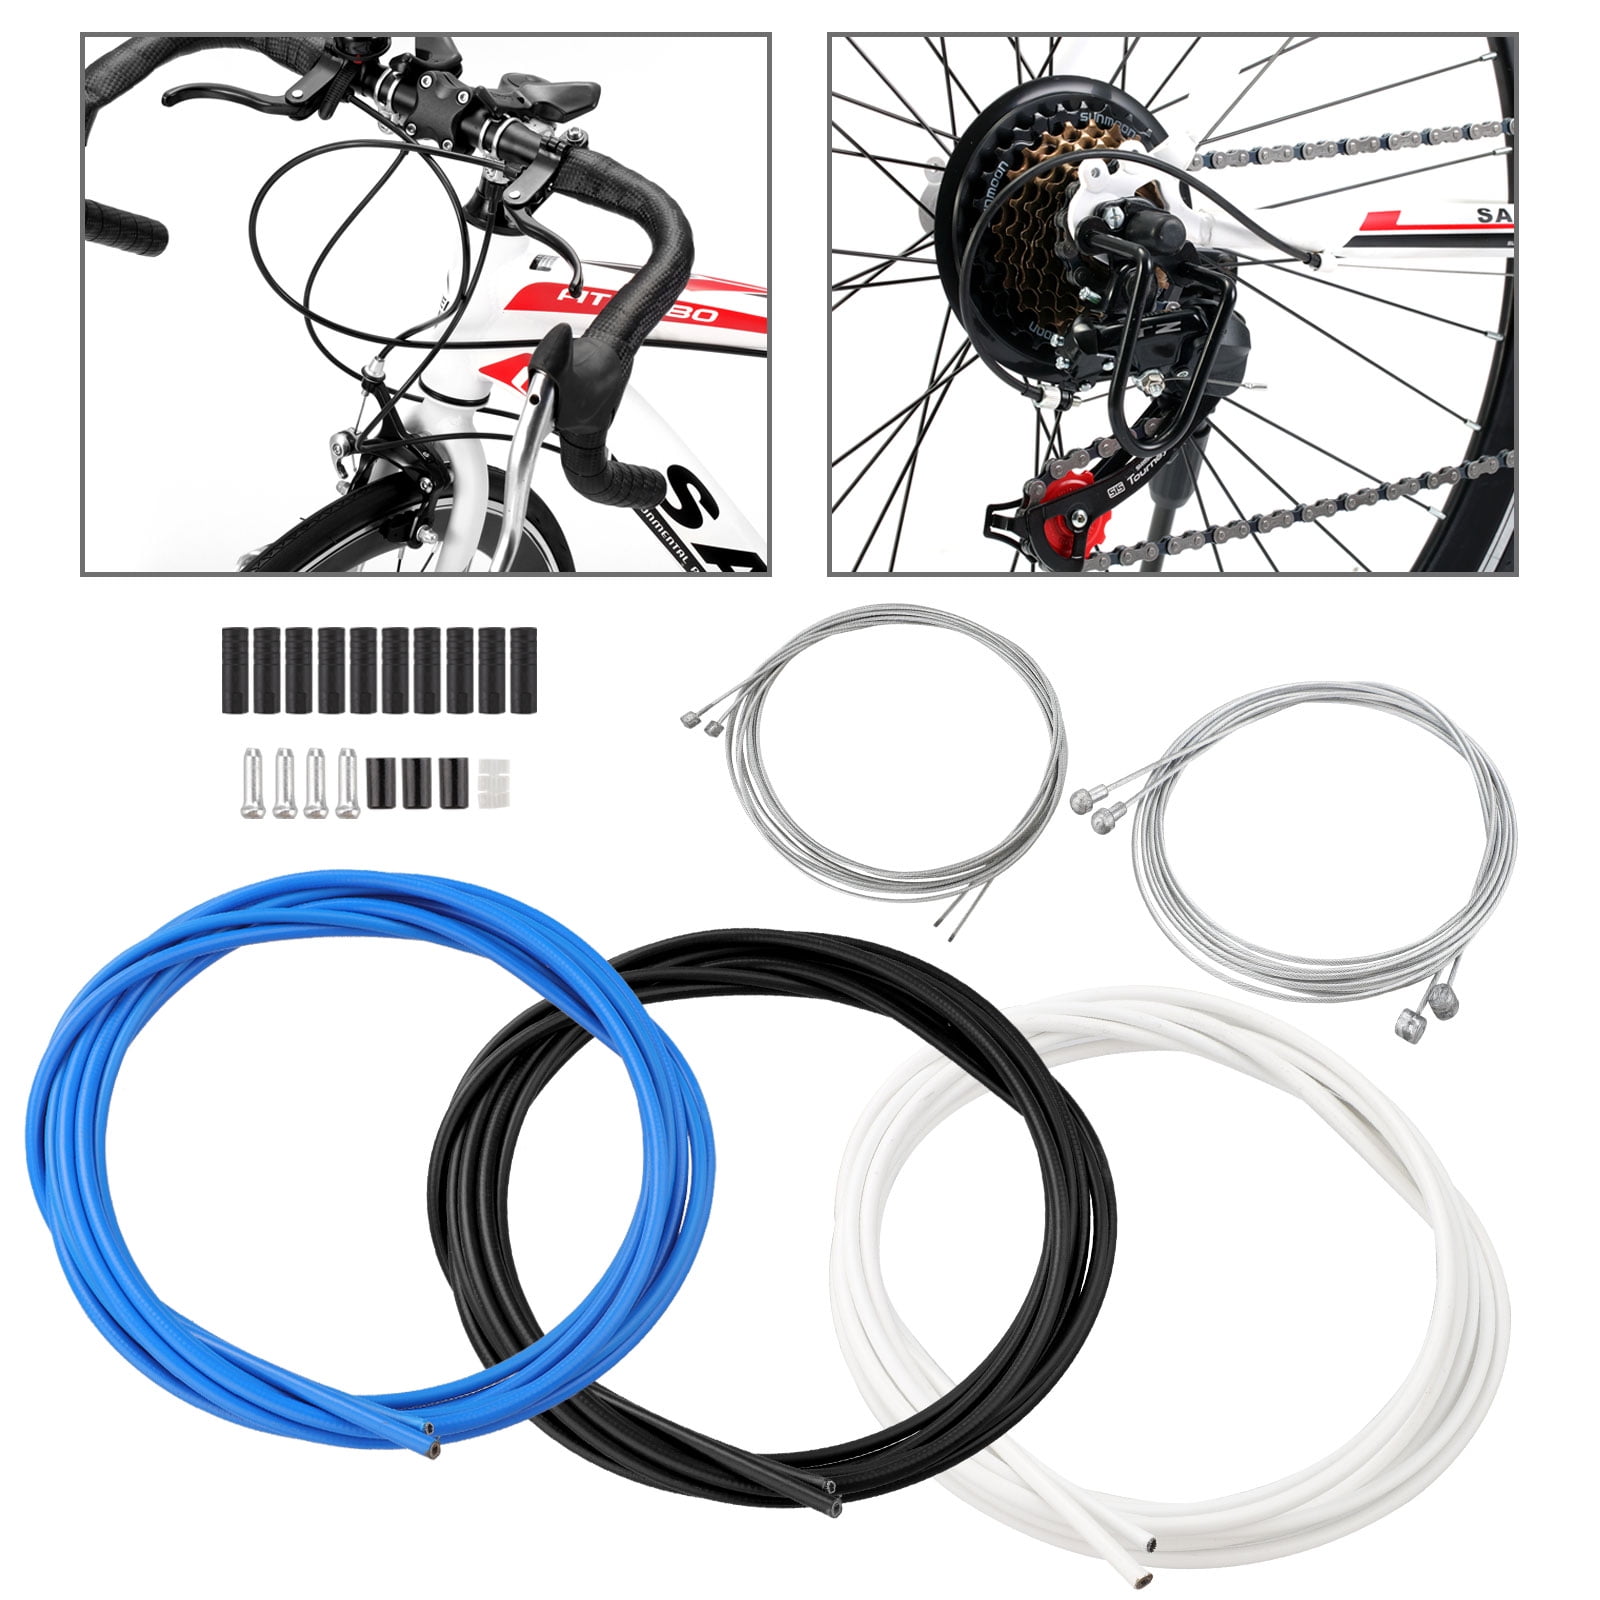 WINOMO Bike Brake Cable Universal Bike Brake Cable and Housing Set Brake Cable Wire for MTB or Road Bikes 